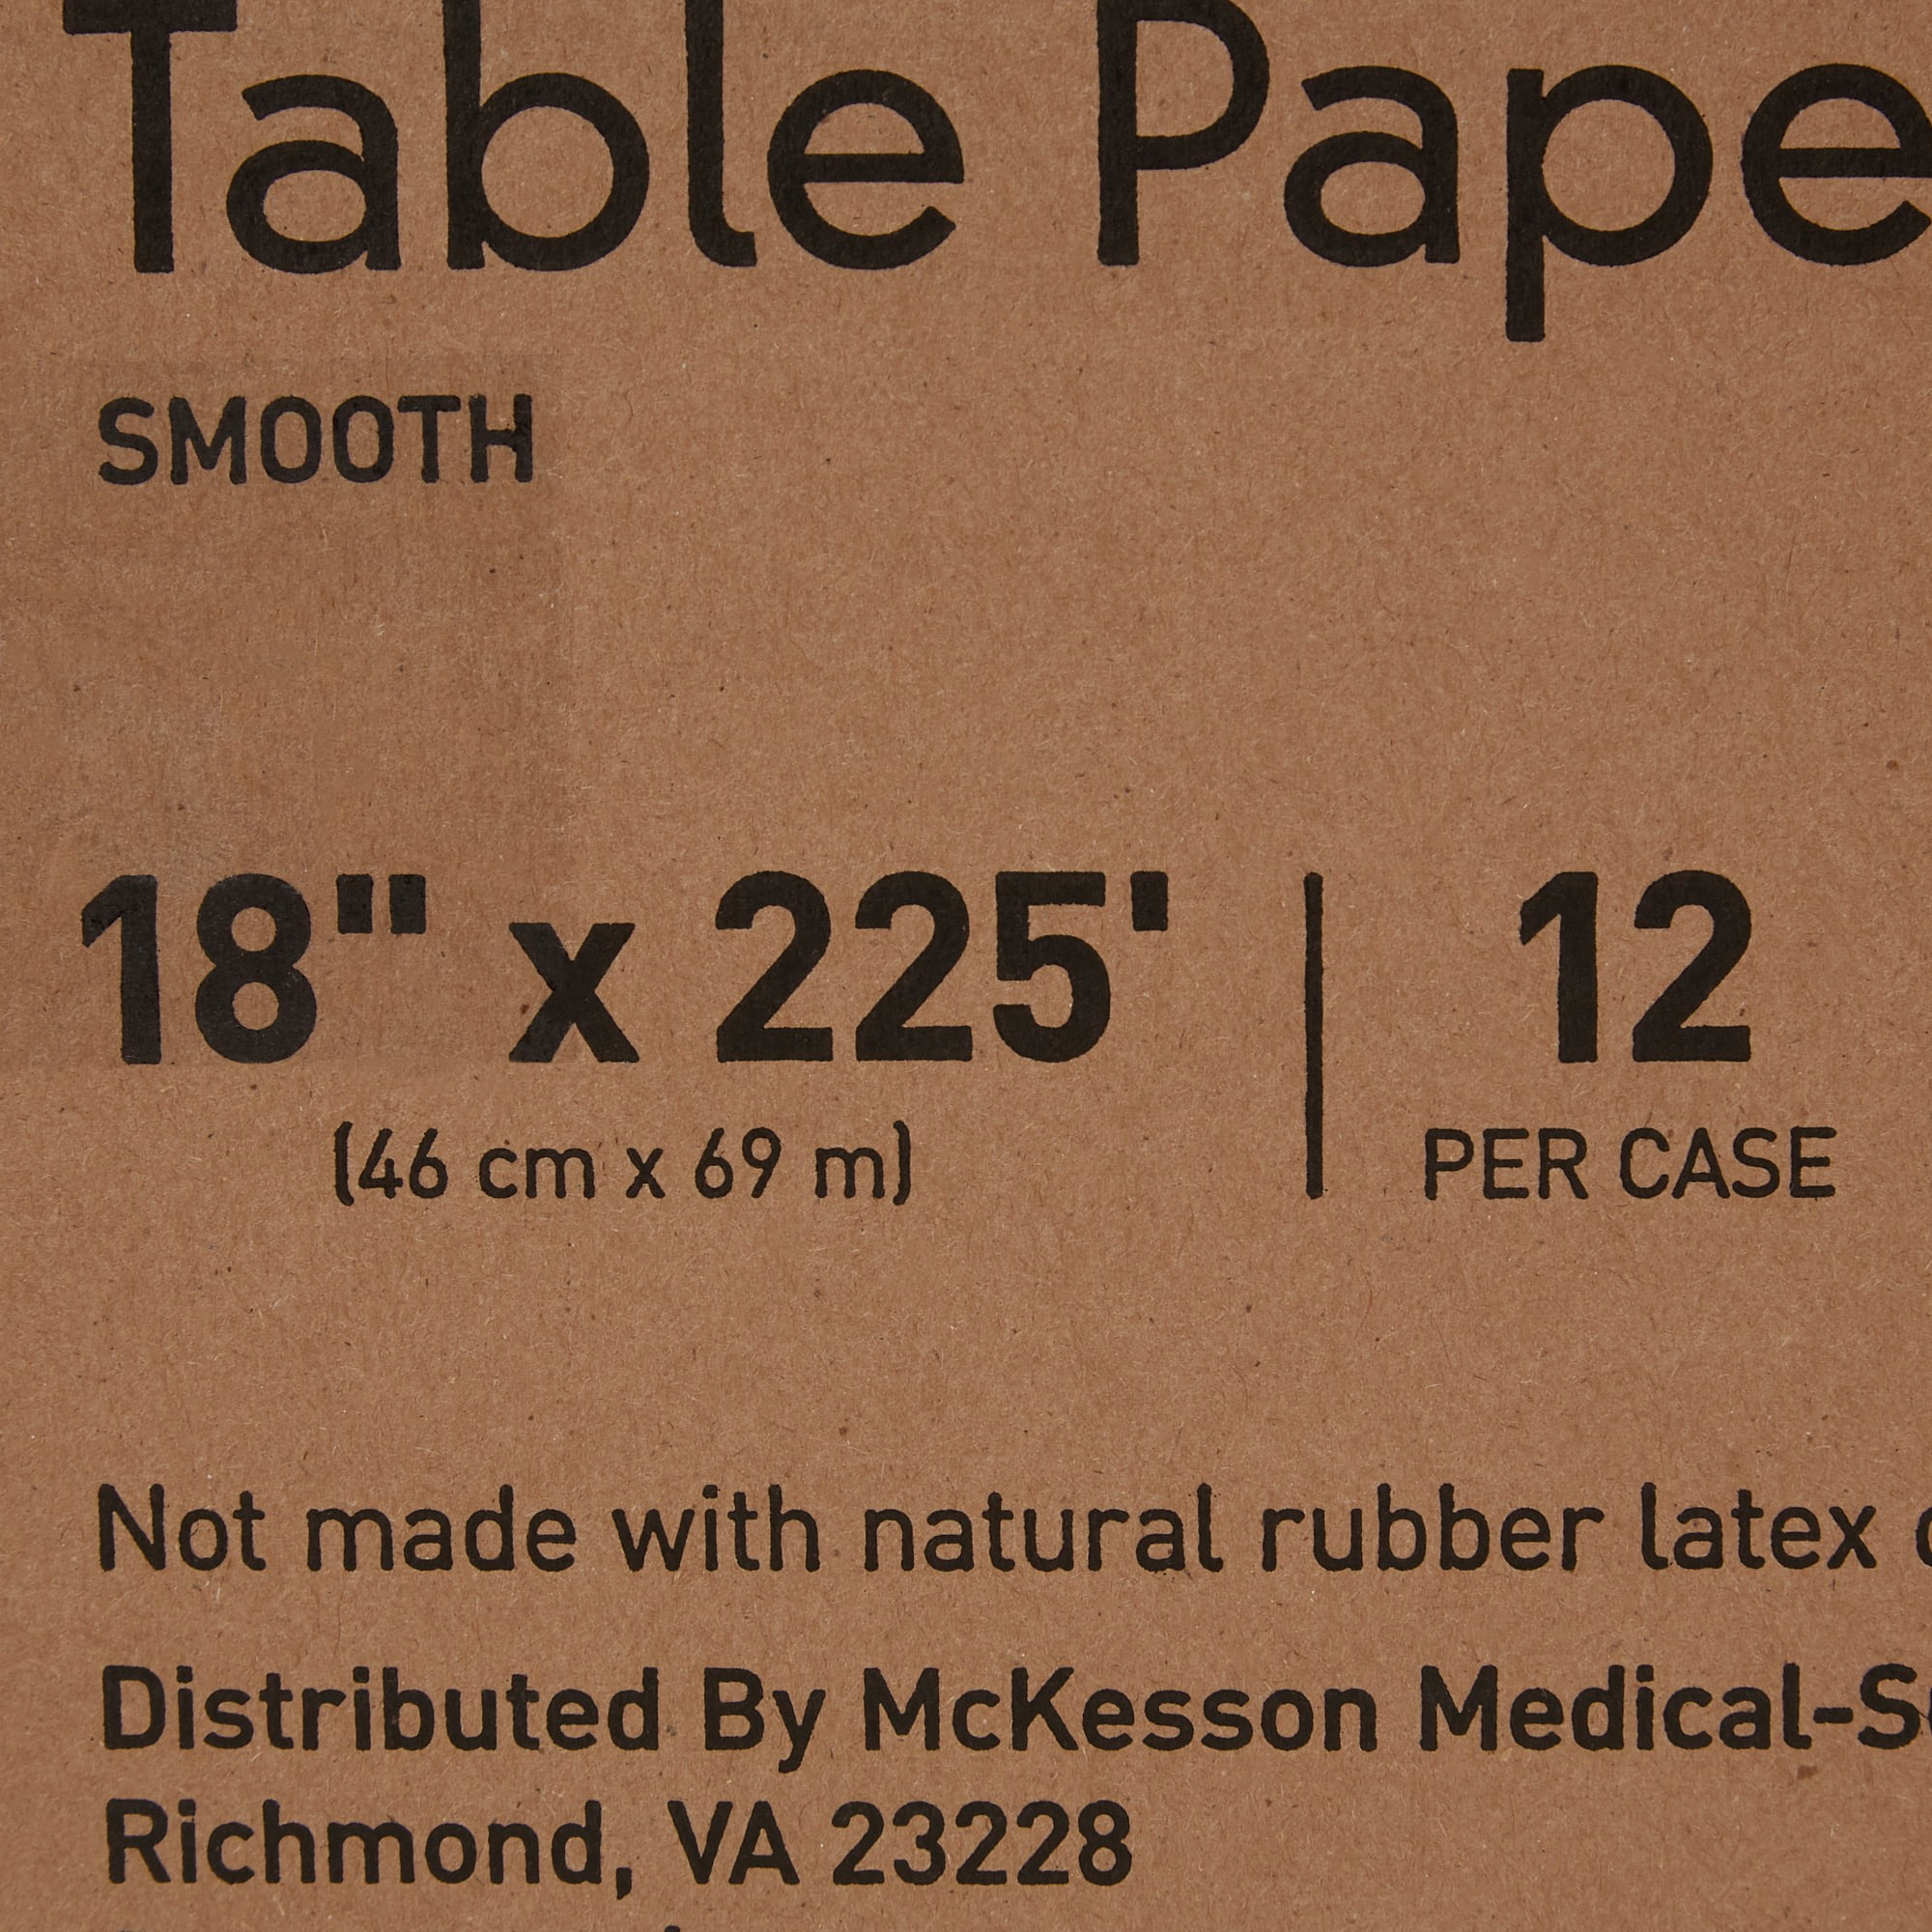 Exam Table Paper 21 x 225' - Mckesson (Brushed, Crepe, Smooth)